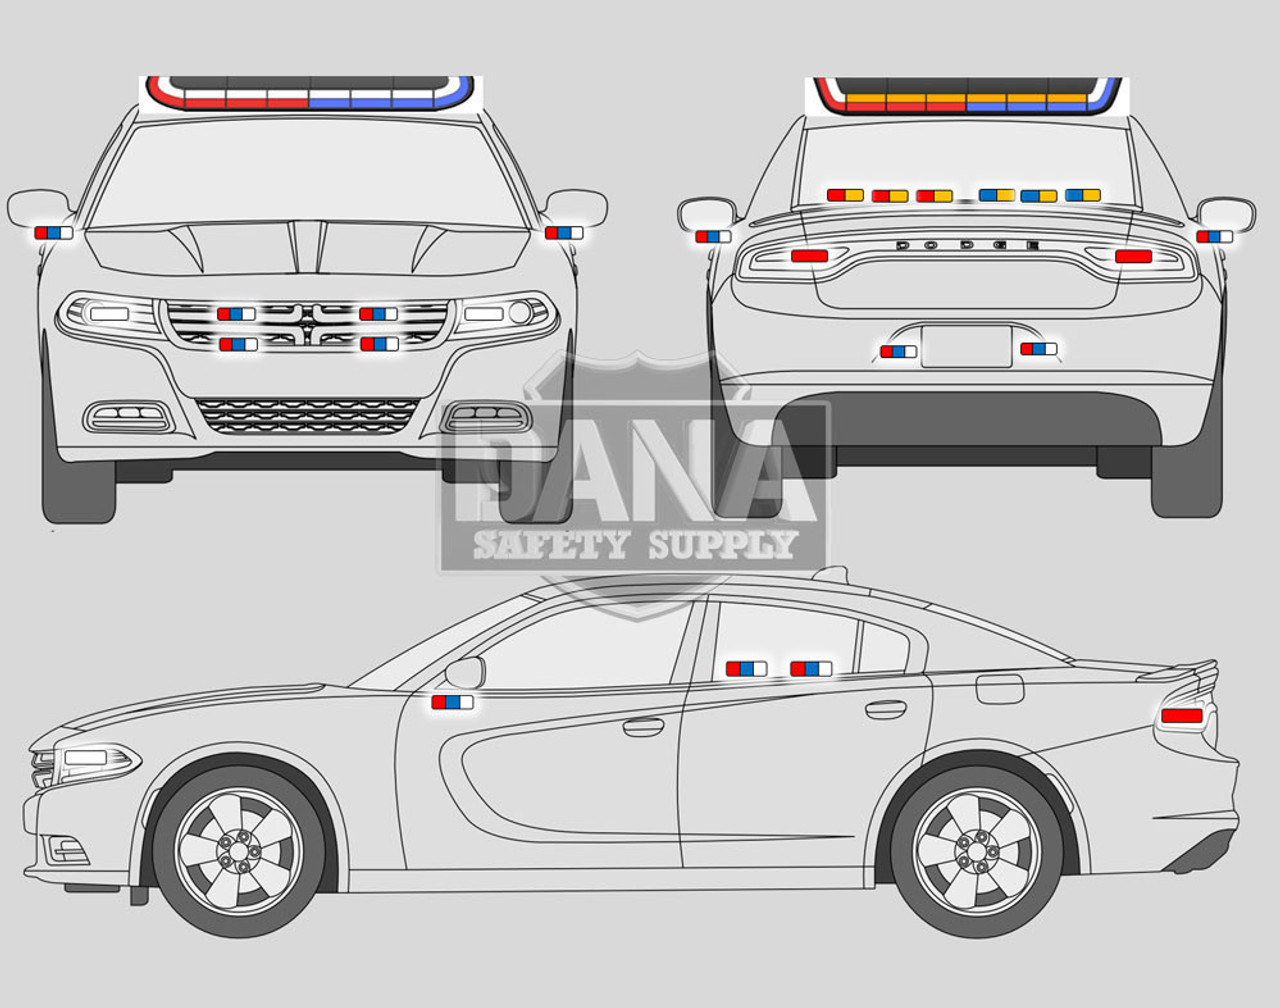 New 2023 AWD V6 White Dodge Charger PPV ready to be built as a Marked Patrol Package Police Pursuit Car (Emergency Lighting, Siren, Controller, Partition, Window Bars, etc.), + Delivery, W-MPV6-4